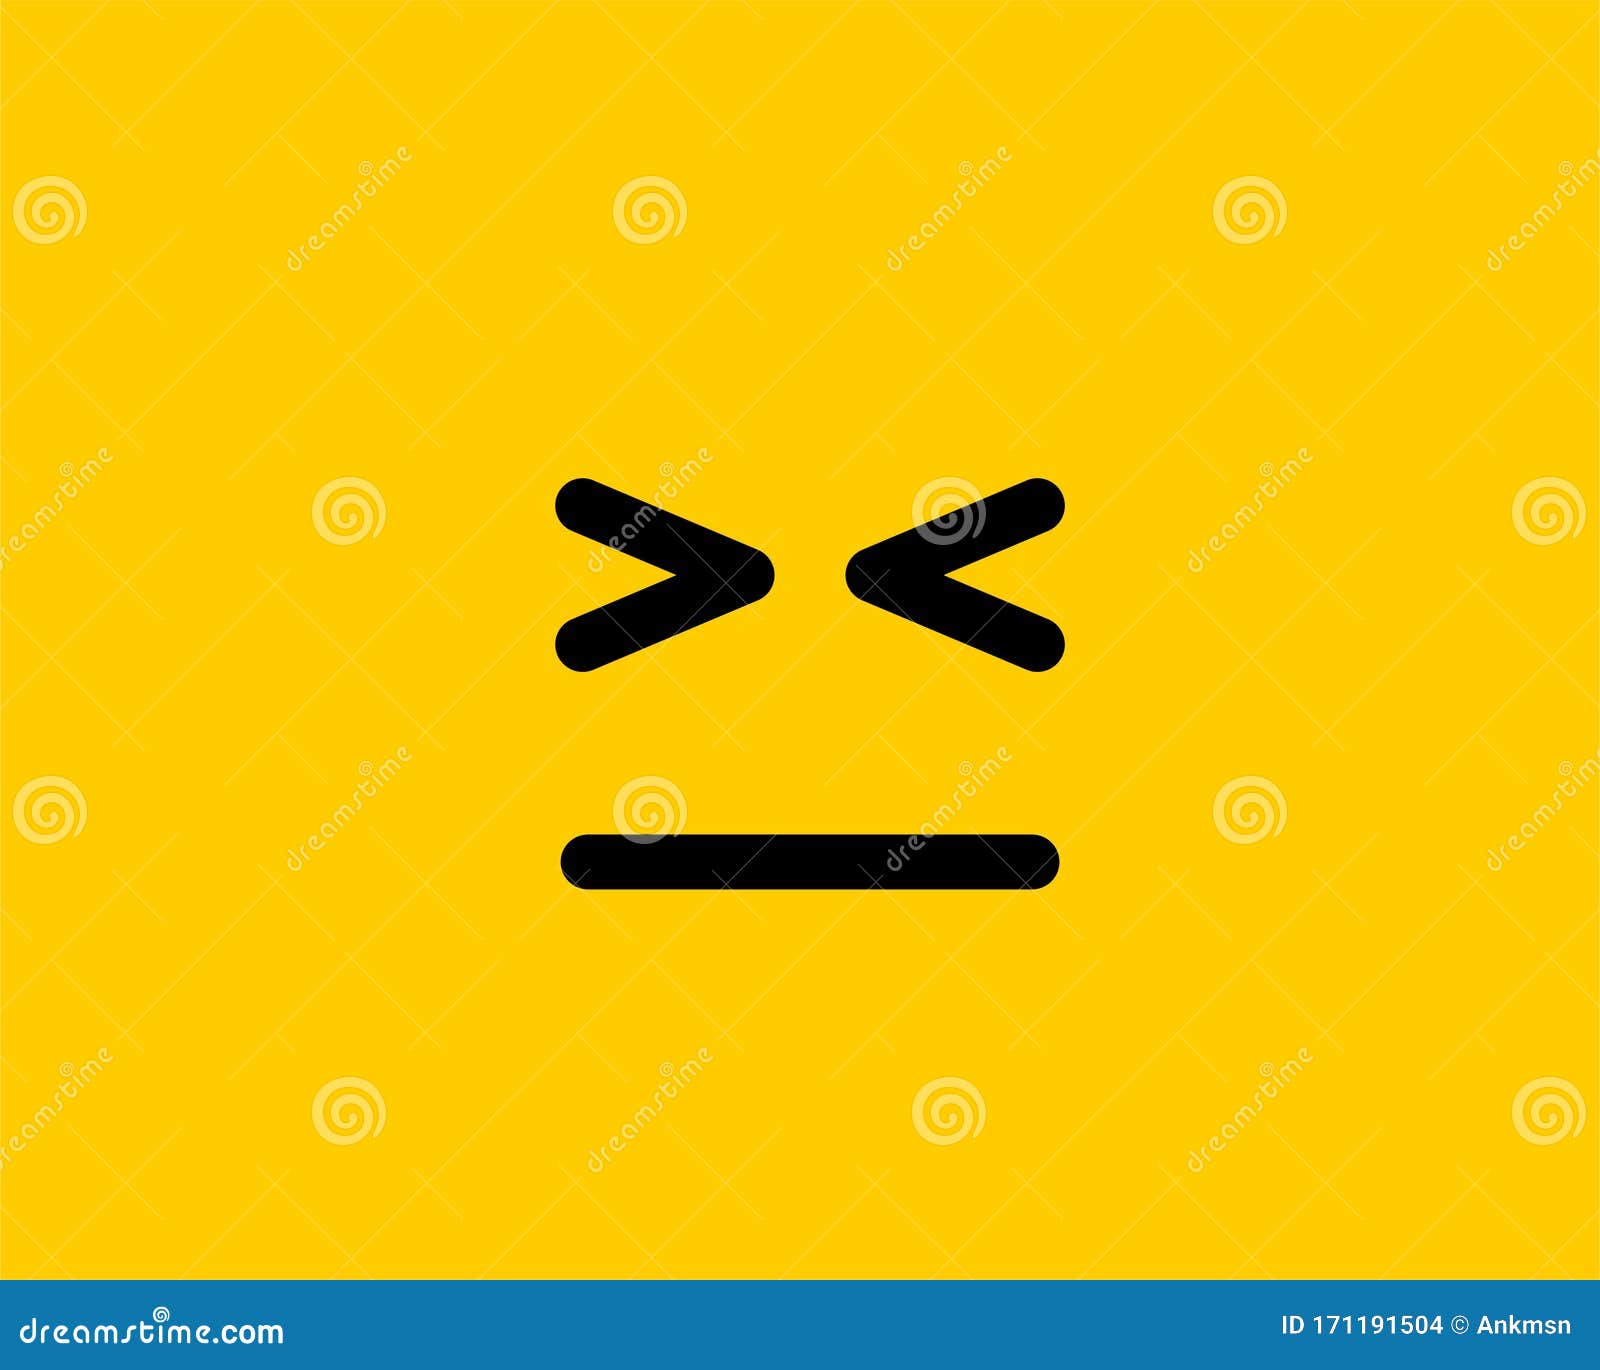 Emoji Smile Icon Vector Symbol on Yellow Background. Smiley Face Cartoon  Character Wallpaper Stock Vector - Illustration of flat, character:  171191504